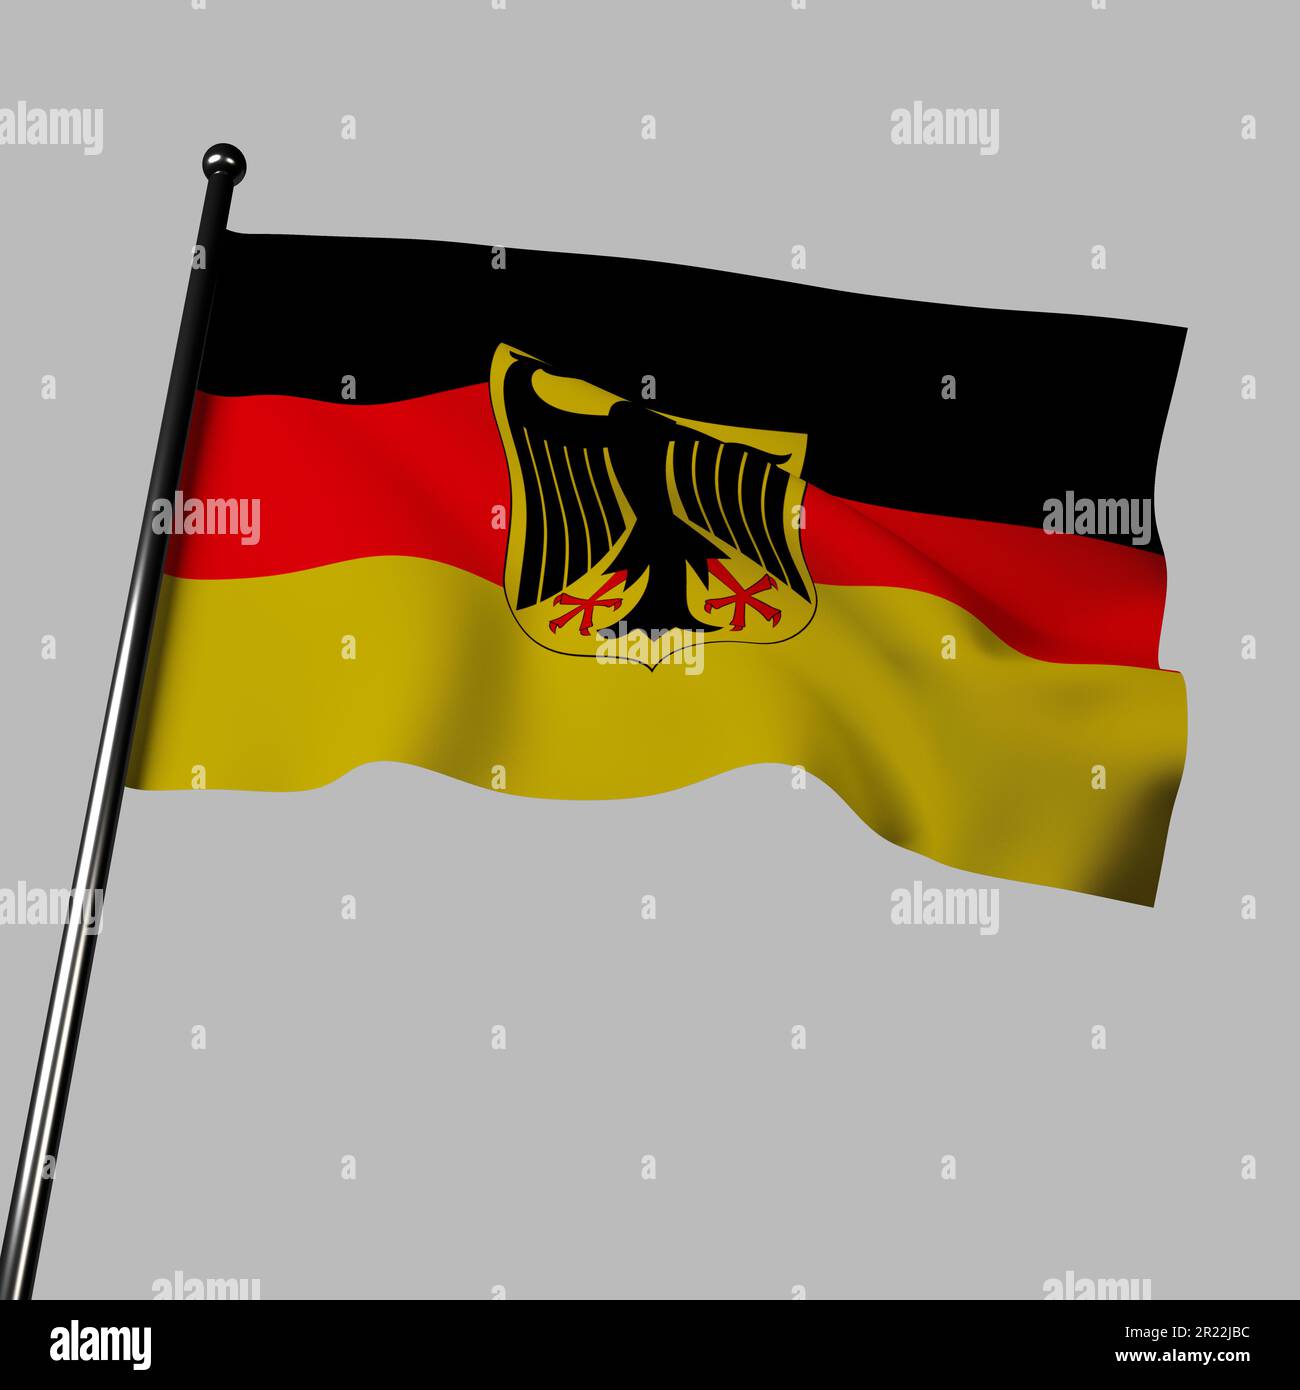 Germany flag waving in wind, on gray background. Its tricolor design features black, red, and gold stripes. The colors symbolize Germany's struggles, Stock Photo